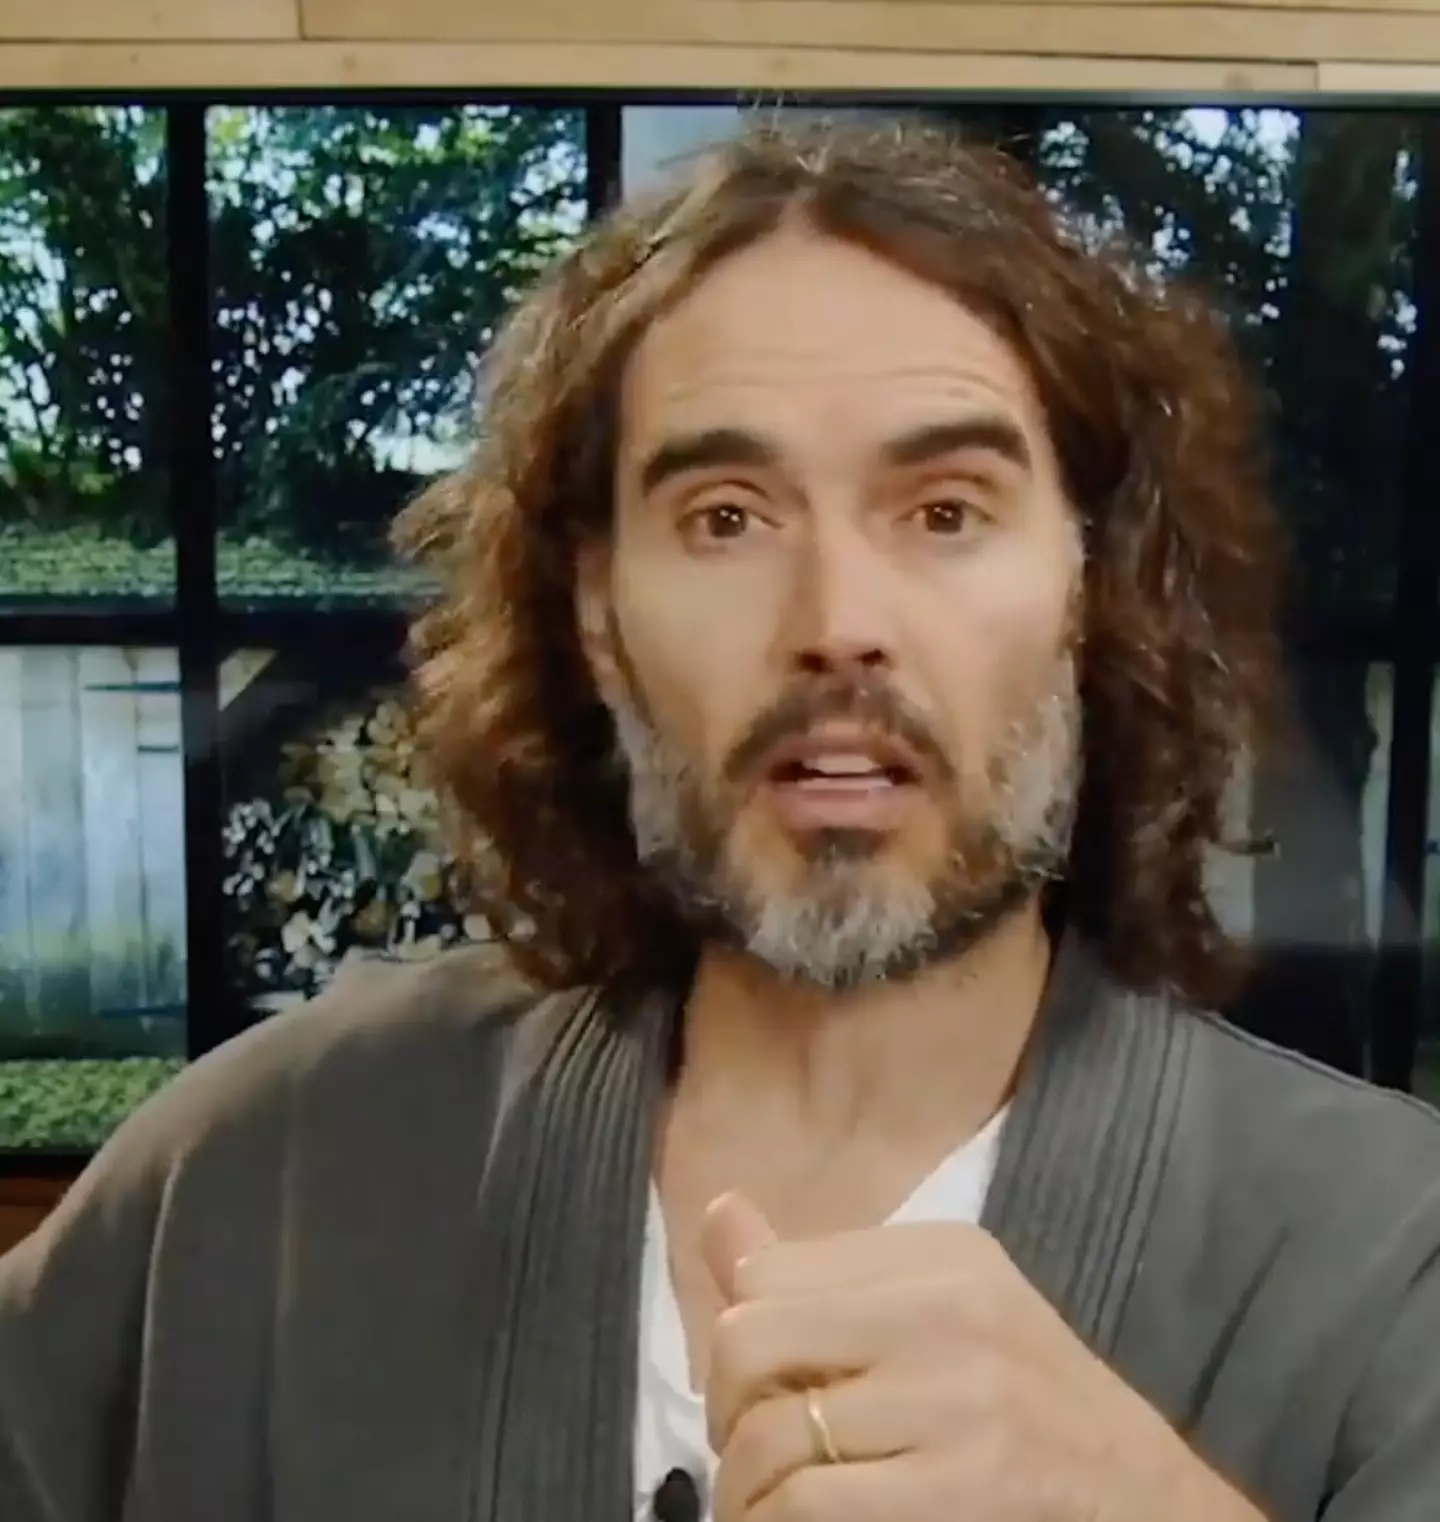 Russell Brand is celebrating 20 years of sobriety.